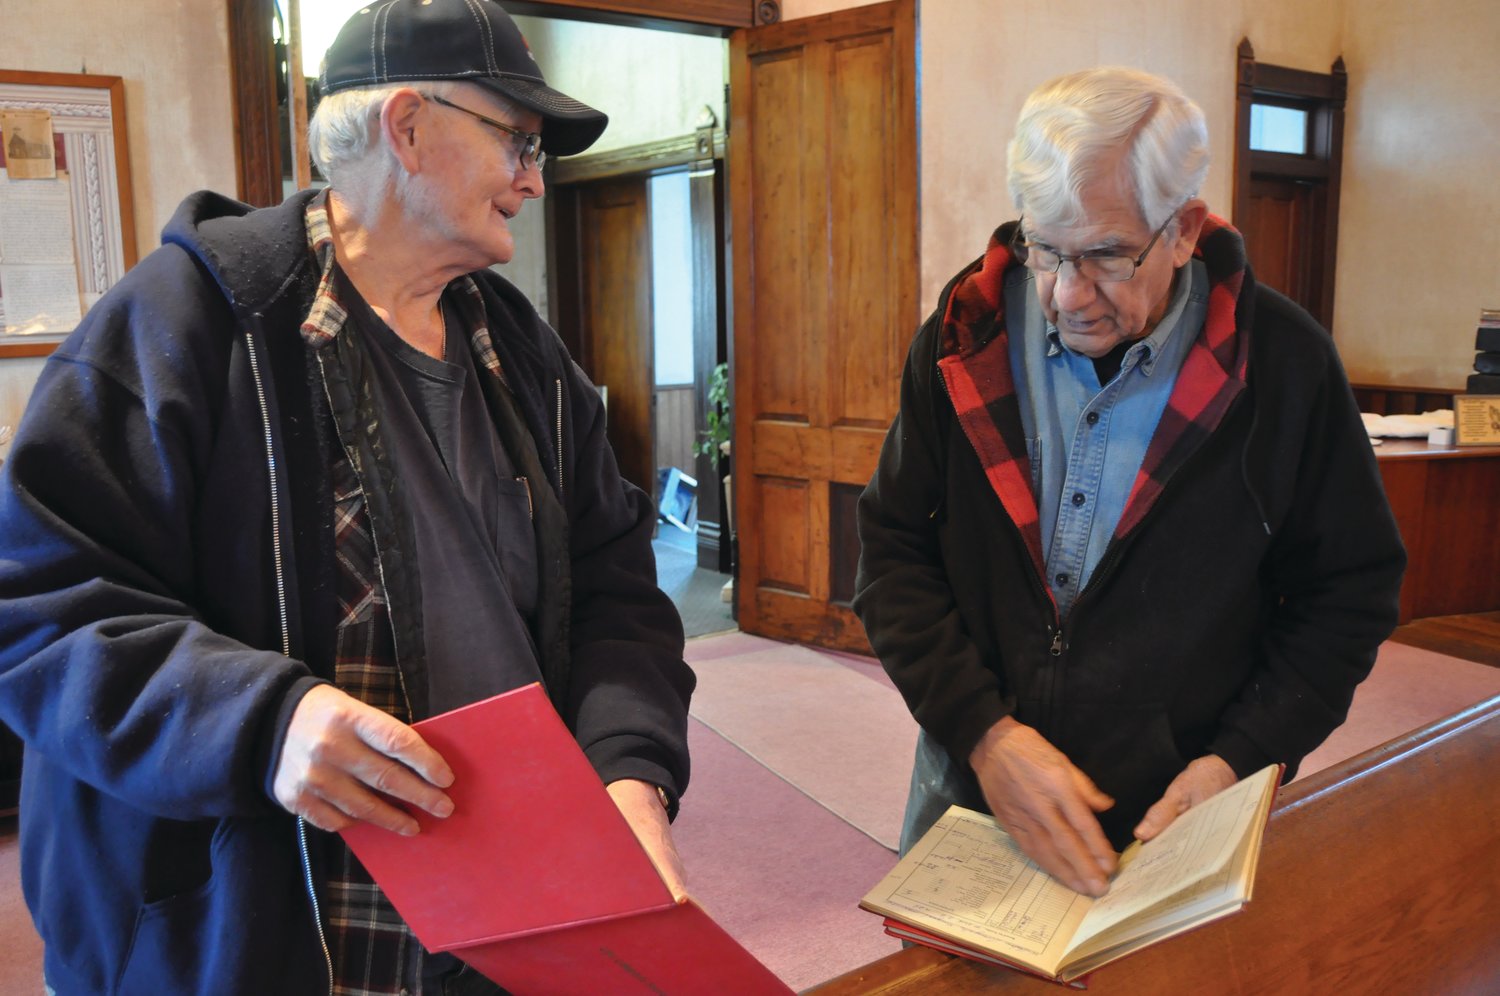 Bill Glover, left, shows Don Cumbow name listed in an attendance book for Osborn Prairie Christian Church. The men's families attended the church.